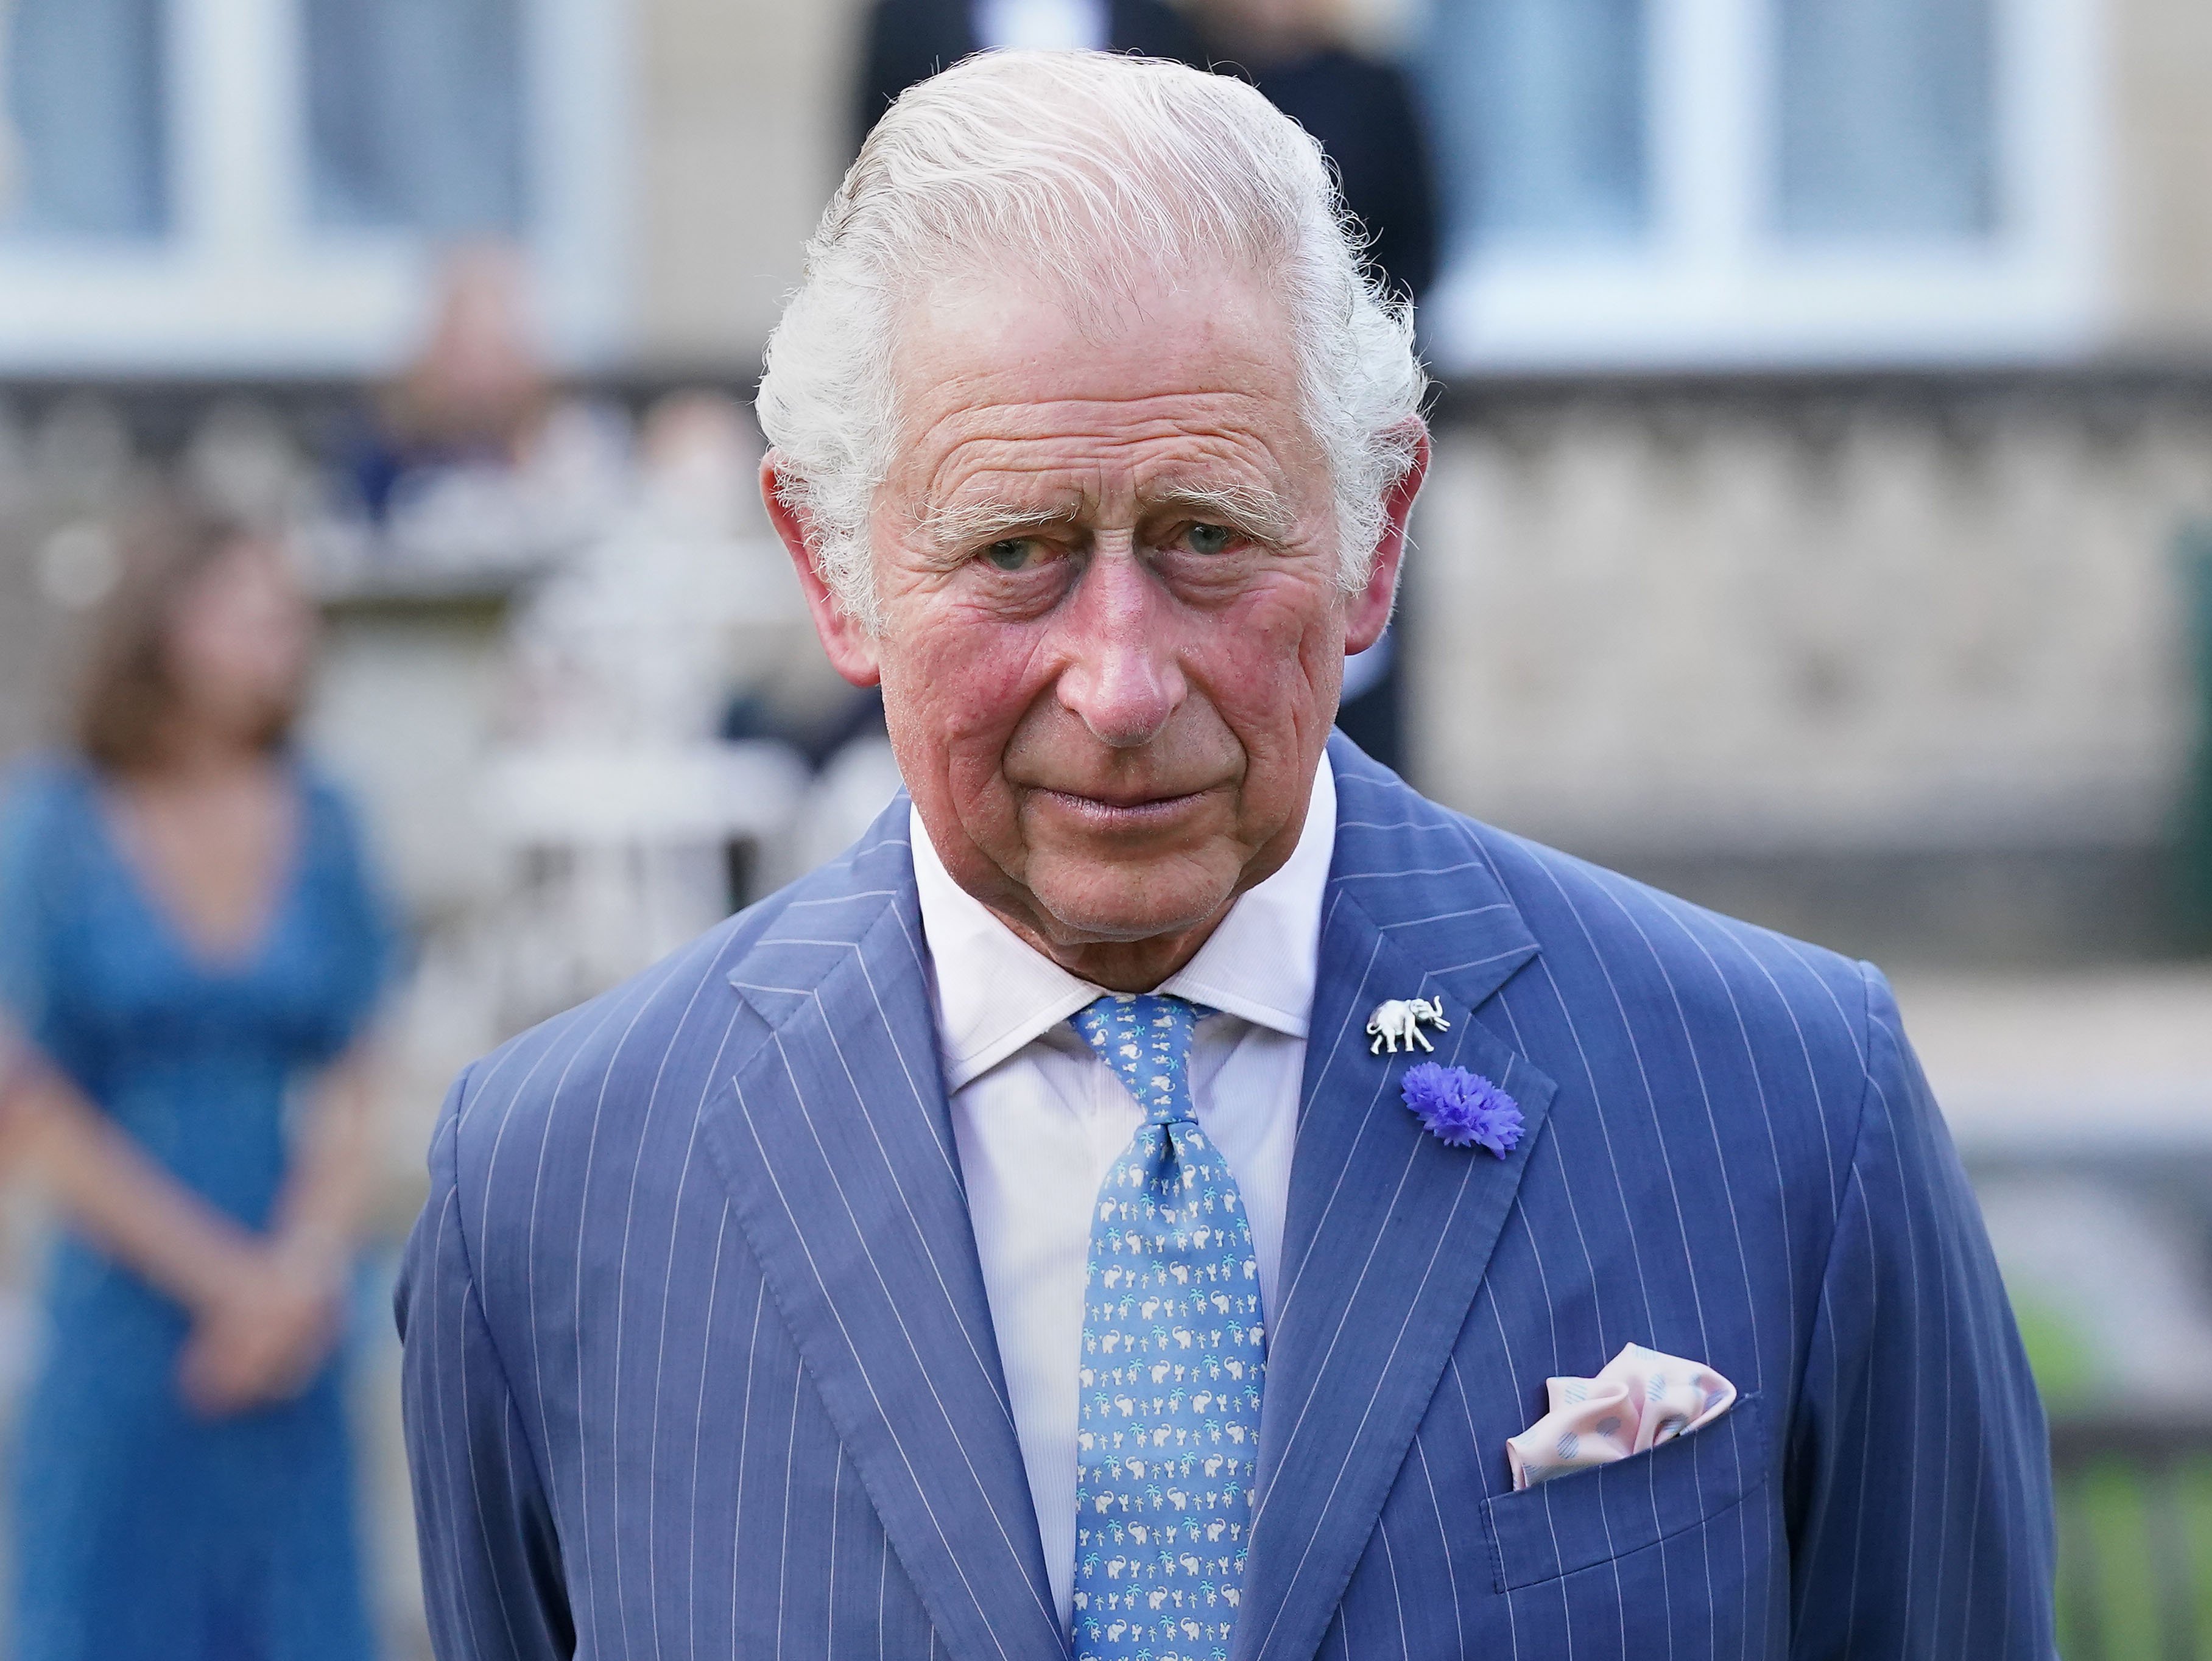 Prince Charles, Prince of Wales attends the "A Starry Night In The Nilgiri Hills" event hosted by the Elephant Family in partnership with the British Asian Trust at Lancaster House on July 14, 2021 in London, England. | Source: Getty Images